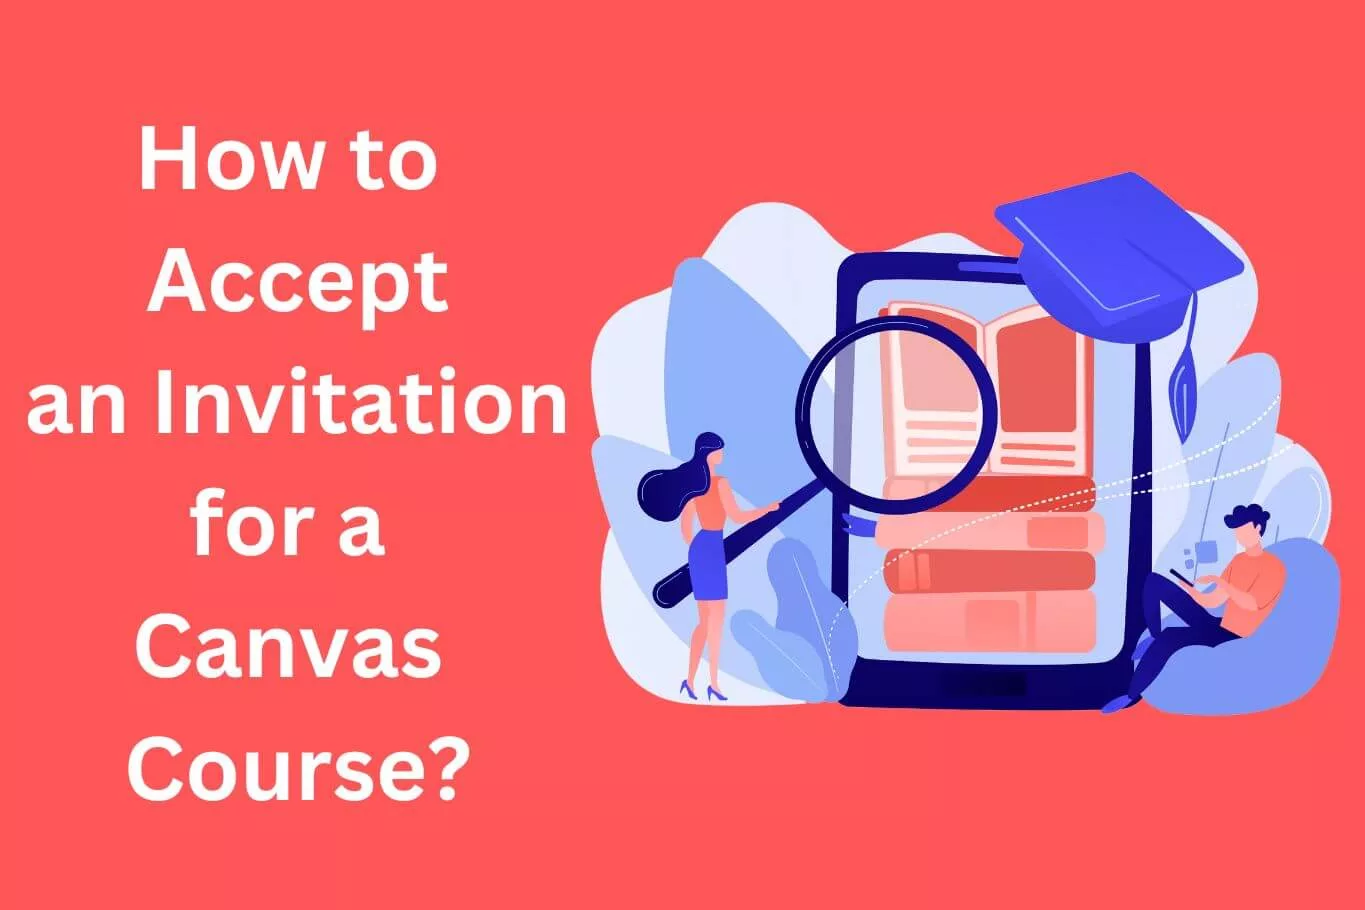 How to Accept an Invitation for a Canvas Course?